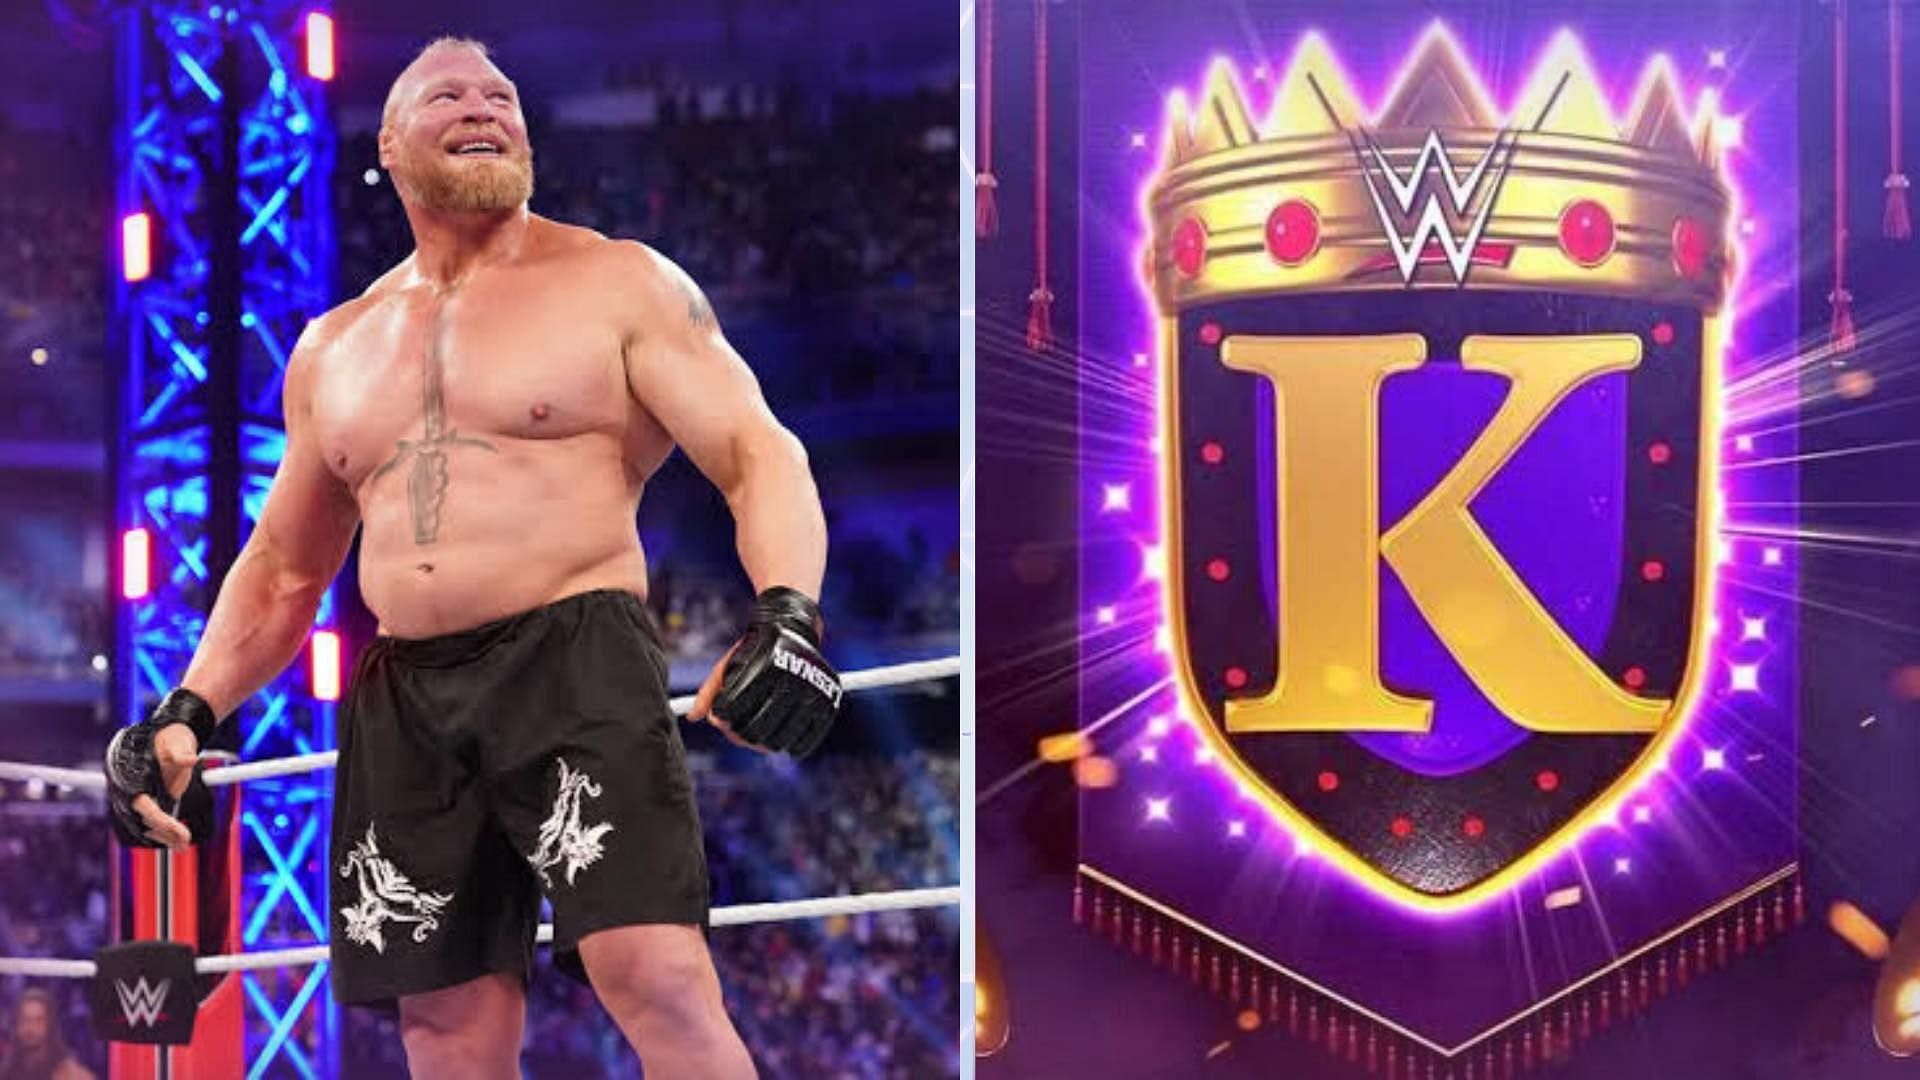 Five WWE Superstars are former King of the Ring winners